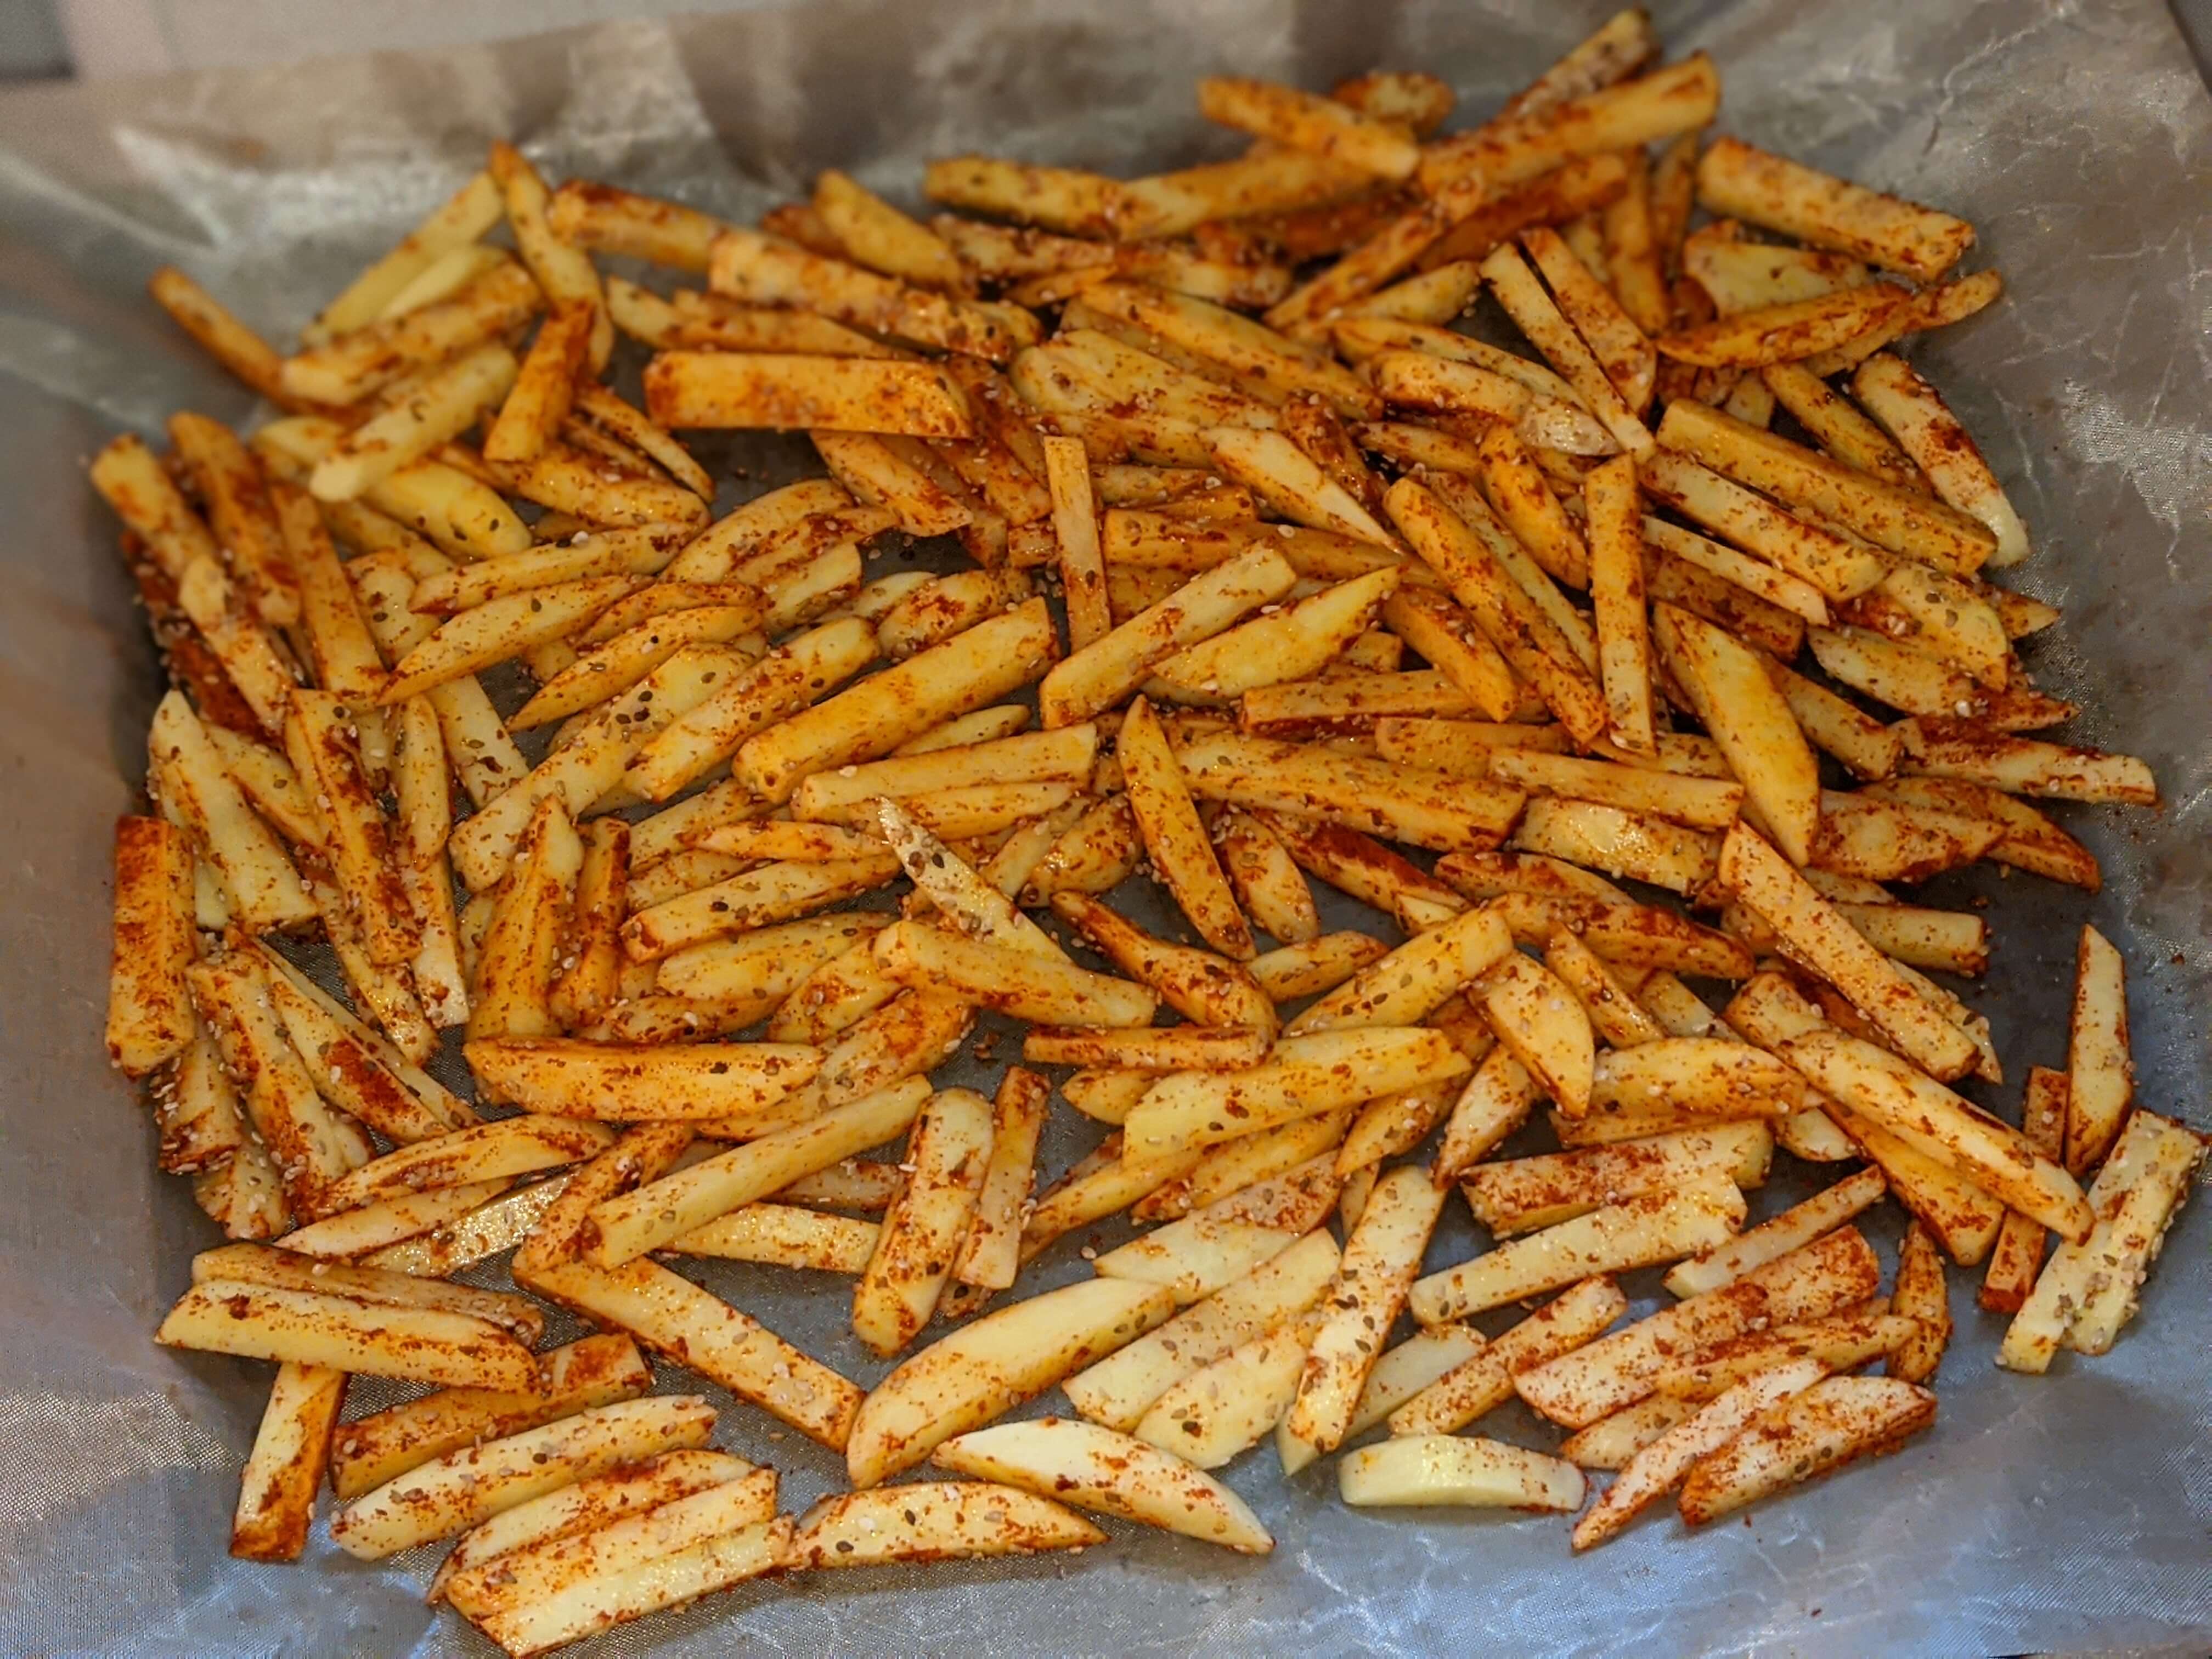 Fries in the oven